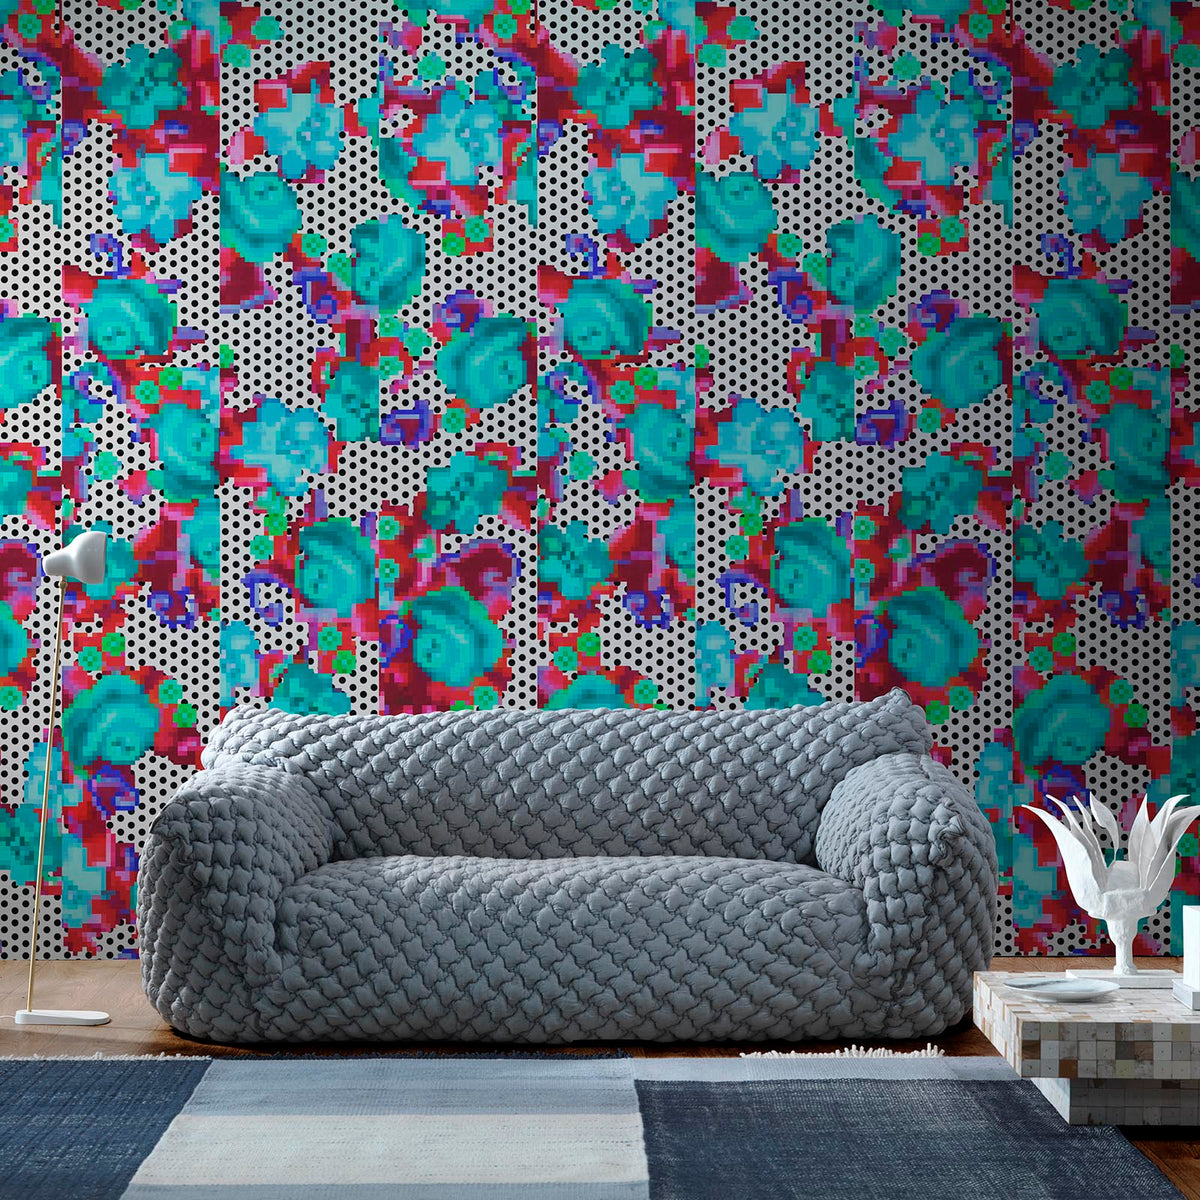 PNO-12 Thammada wallpaper by Paola Navone for NLXL